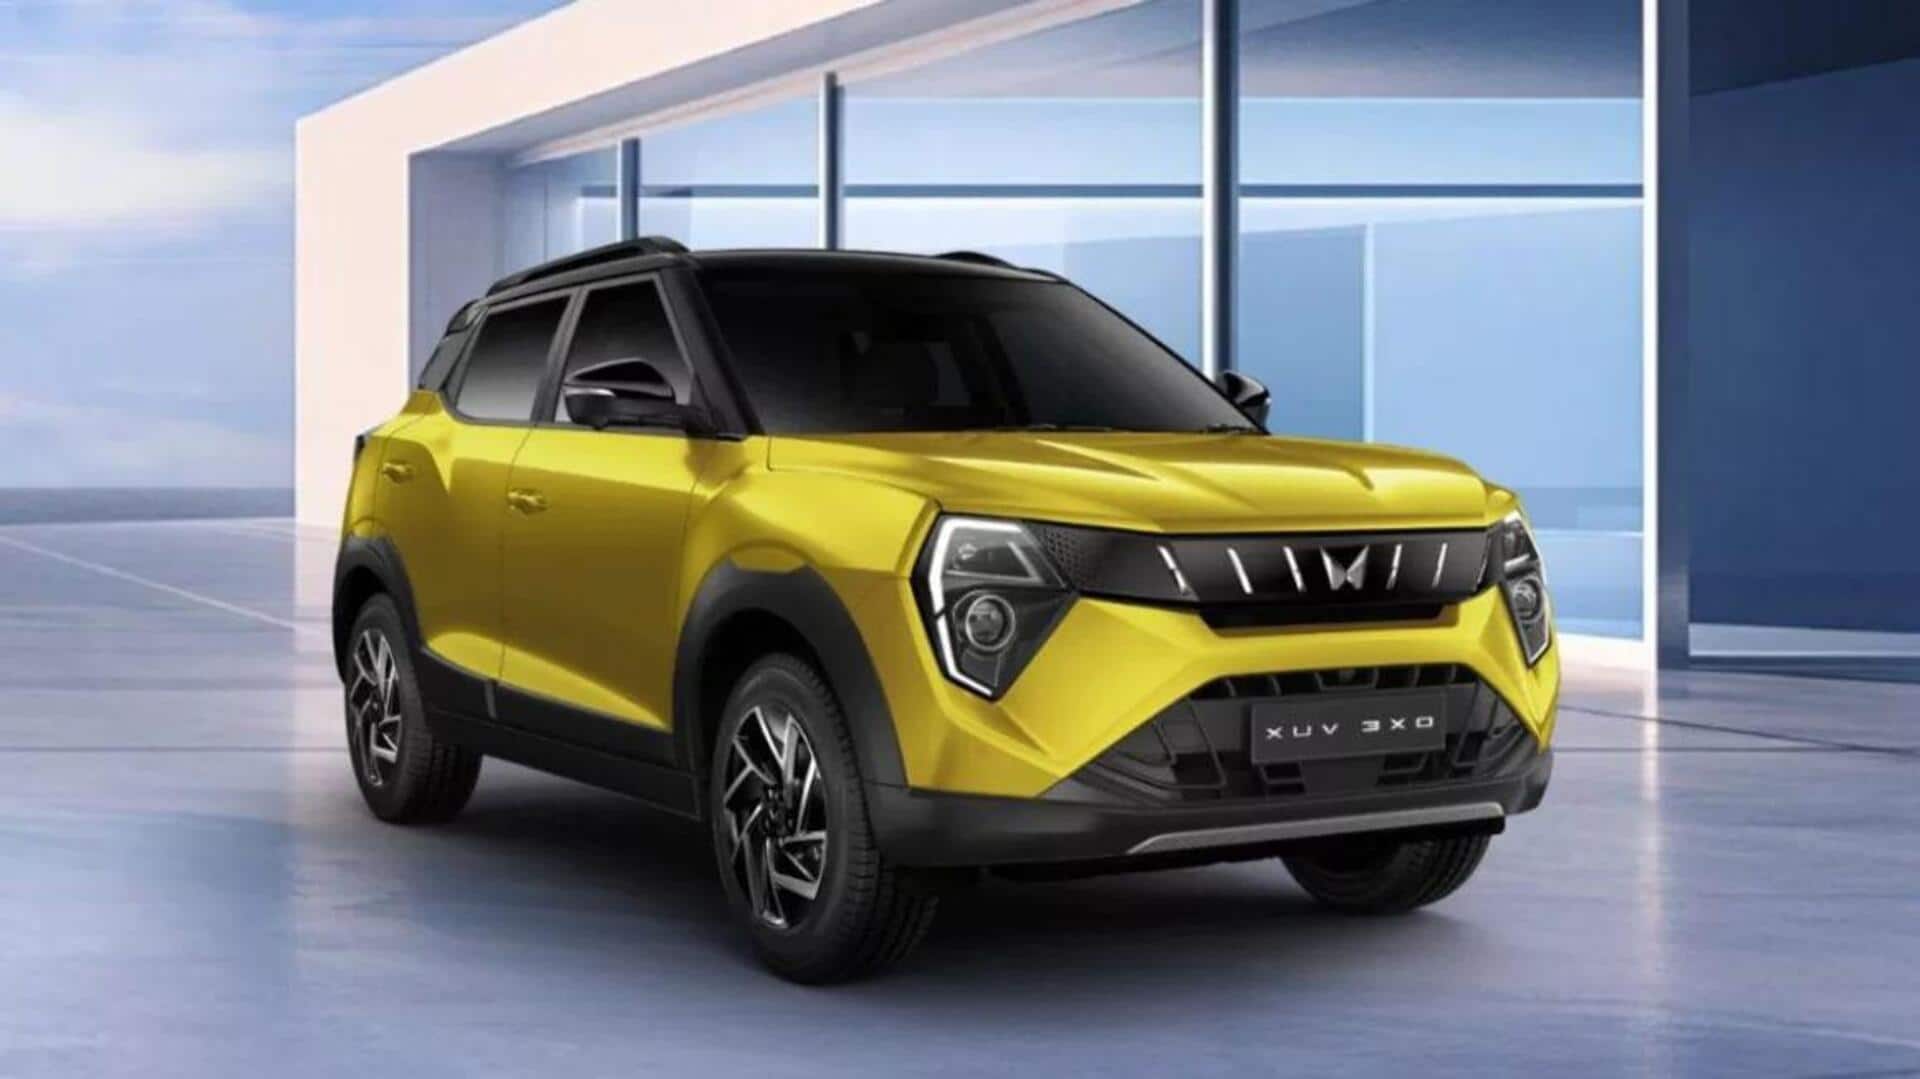 Mahindra XUV 3XO to begin deliveries with 4 variants